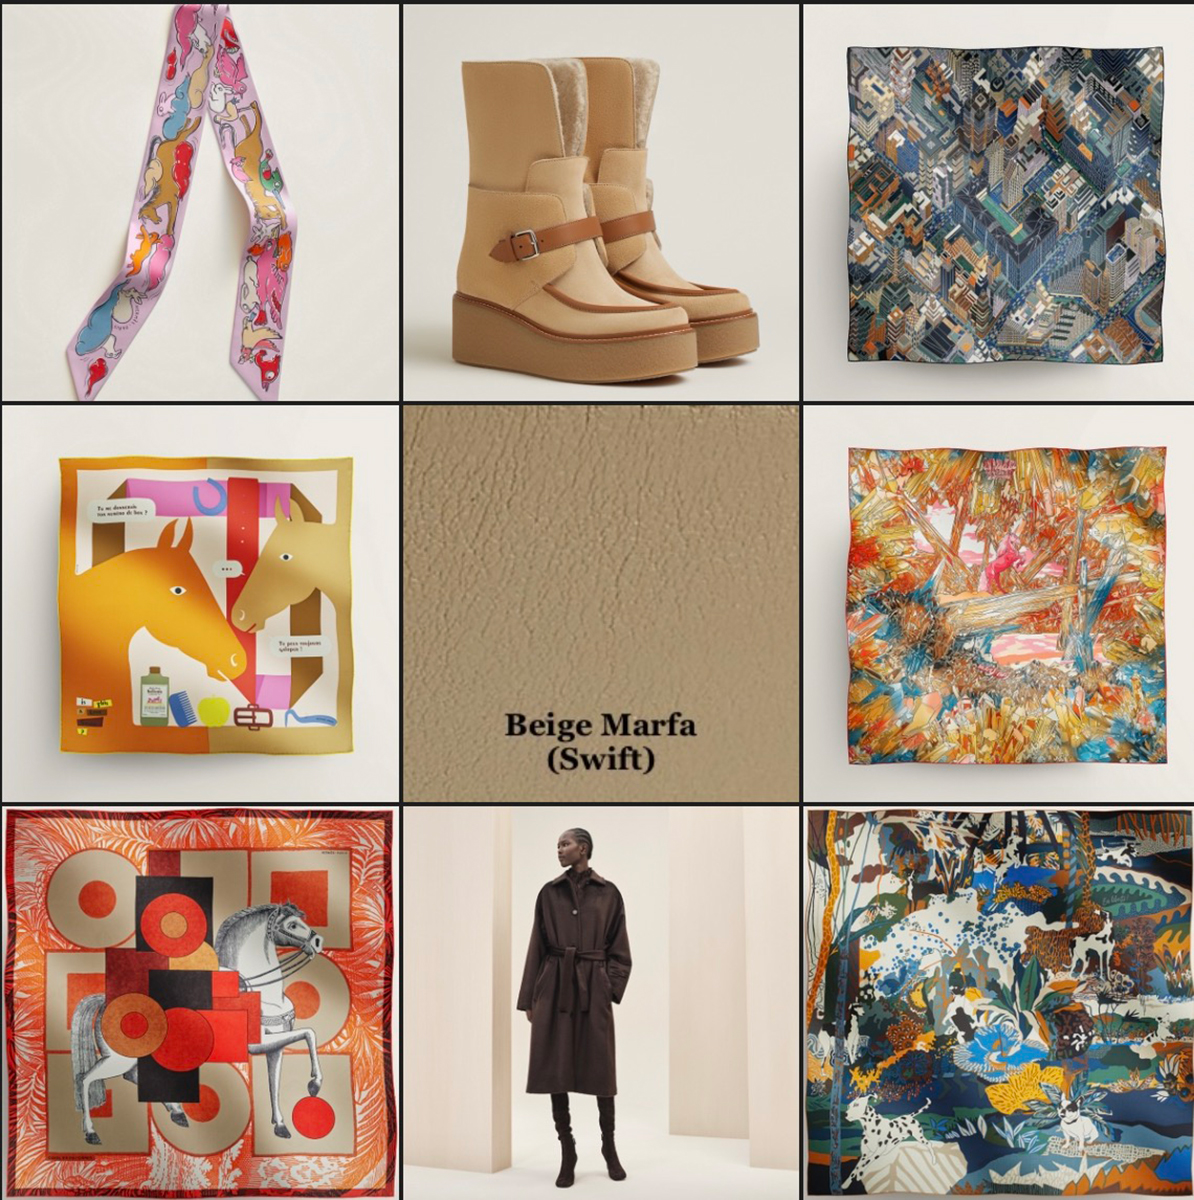 Beige Marfa with (clockwise from top left): Mille et Un Lapins Twilly cw 03 Parme/Rose Vif/Camel; Hemisphere Boots in Multicolore Beige Palomino, Ref #H232029Z W4360; Pantin City Scarf 90, Ref #003969S 05, cw05 Marine / Beige / Parme; La Vallee de Cristal Scarf 90; En Liberte! Shawl 140, Blanc/Vert Loden/Miel; Trench Coat in Marron Ébène, Ref# H3H0123DHU536; Cavalier en Formes scarf 90 cw12 Camel/Orange/Brique; and Is This A Love Story? Scarf 70 Ref#984043S 06, cw06 Rose Nacre / Ocre / Beige.